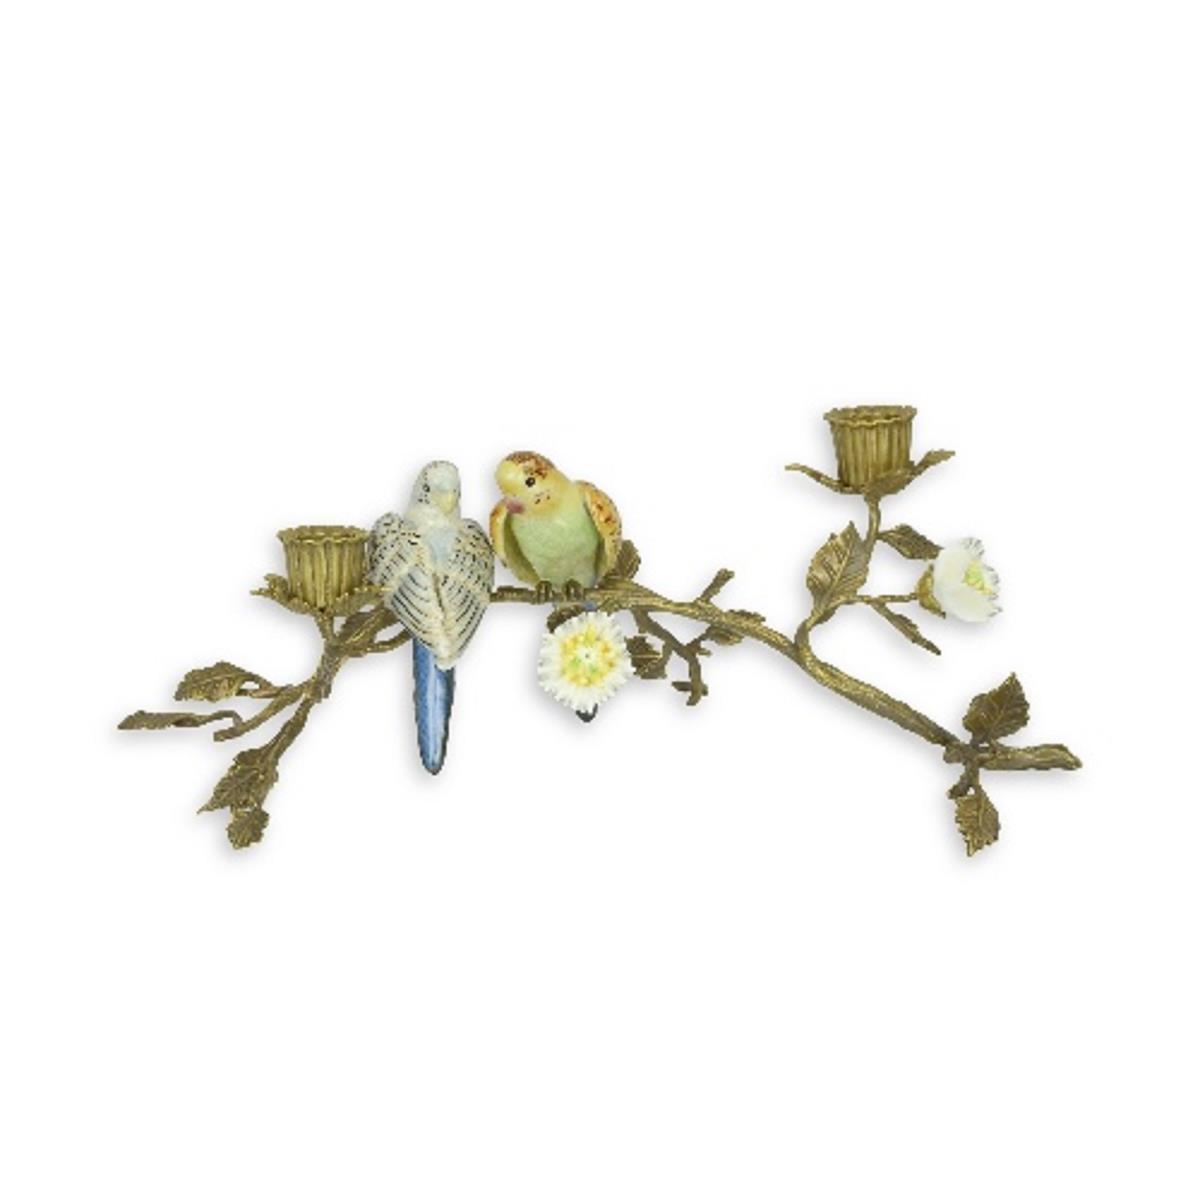 A BRASS CANDLE STAND MOUNTED WITH PORCELAIN BIRDS